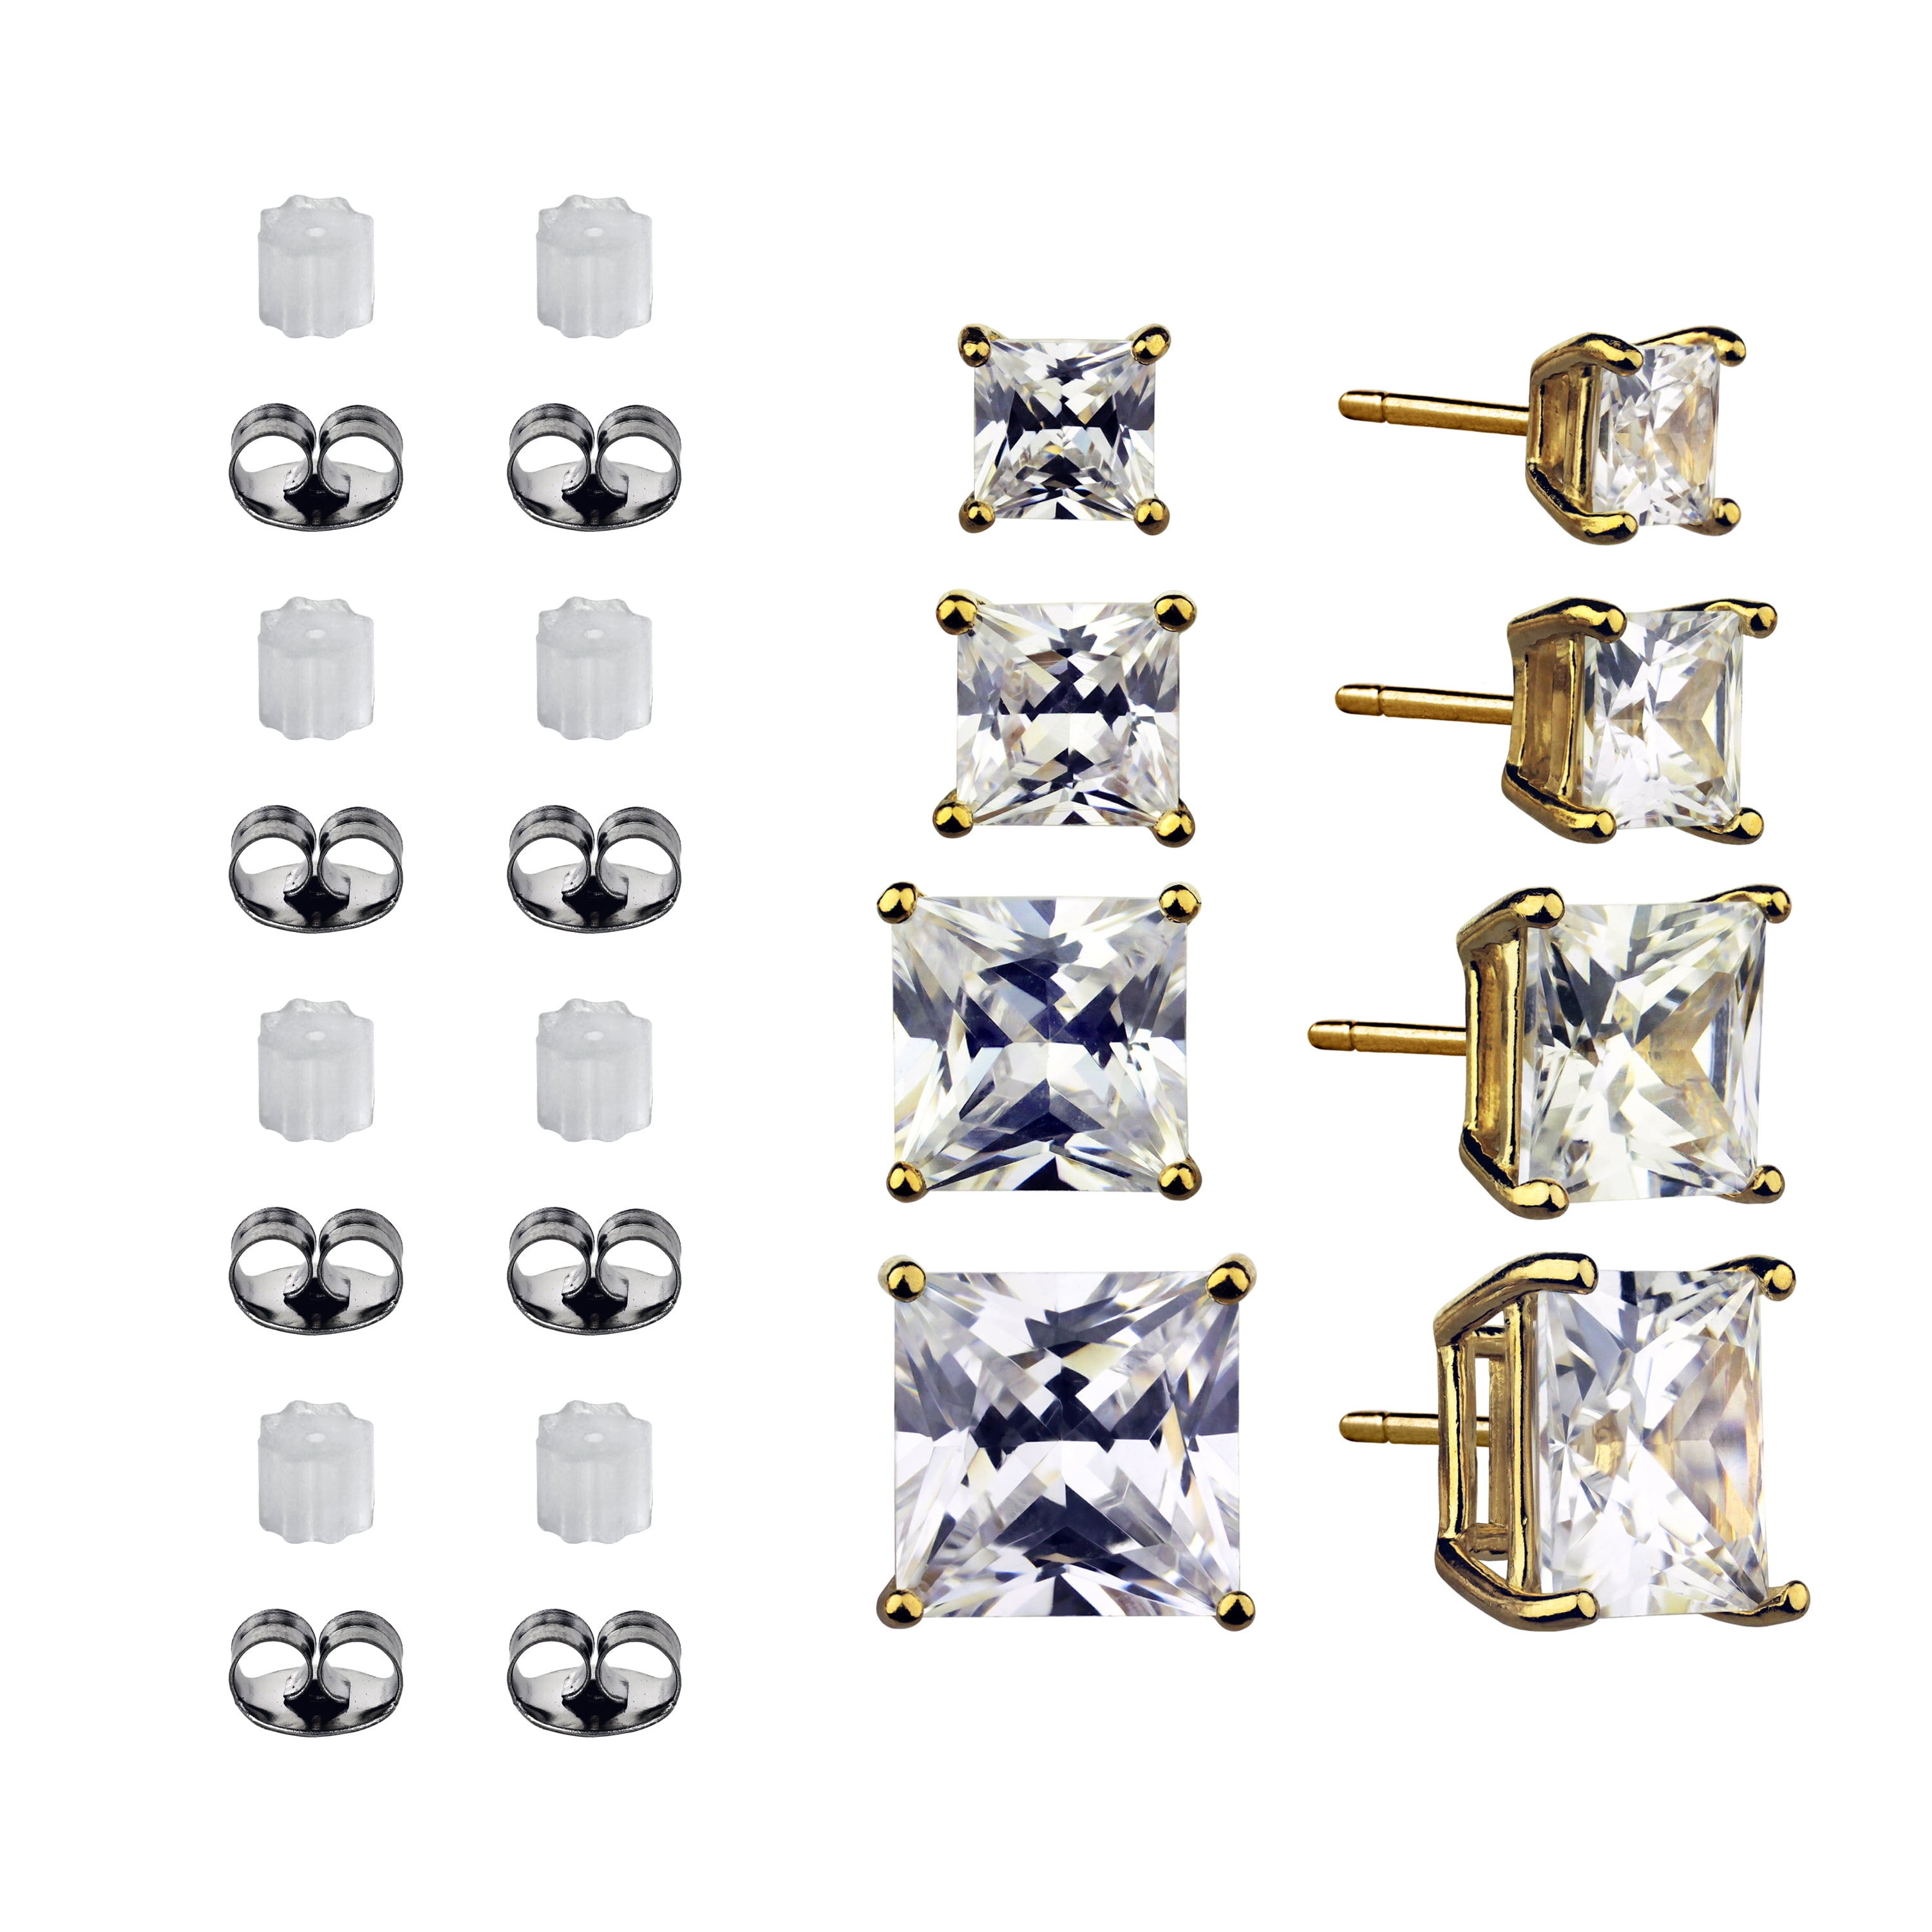 Brilliance Fine Jewelry 14K Gold over Silver Simulated Diamond Square Earring Set